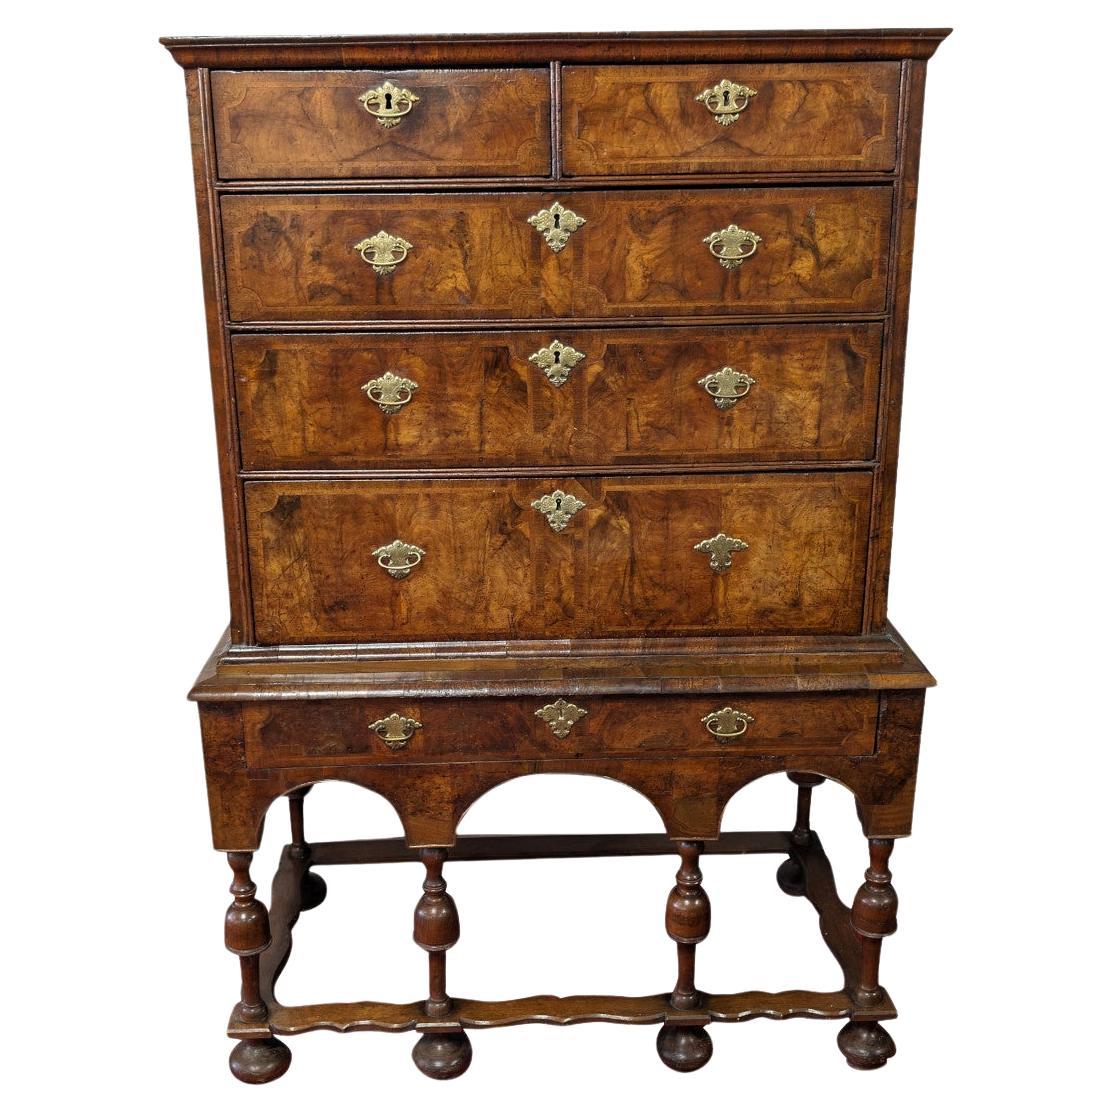 Antique English William & Mary Burl Walnut Cabinet On Stand, Late 17th Century For Sale